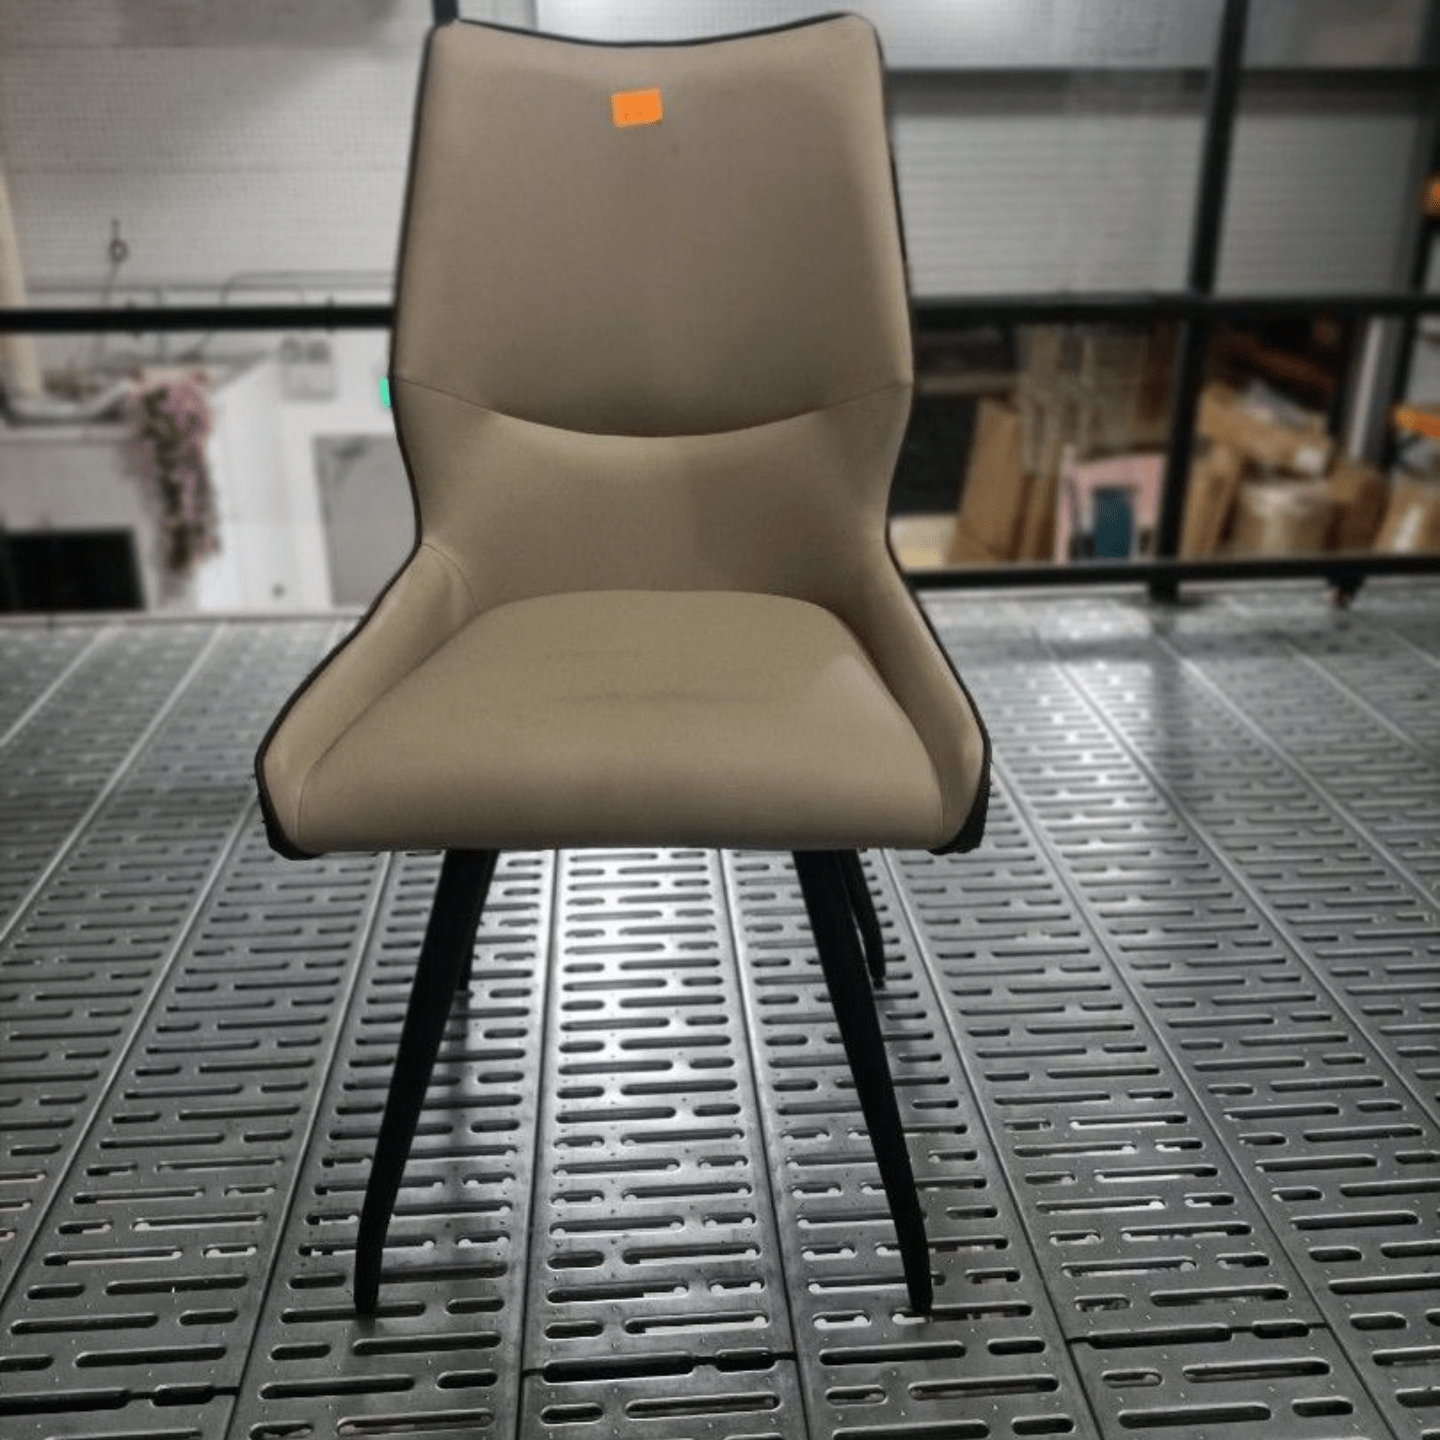 Oorelite Chair in BEIGE - one piece only